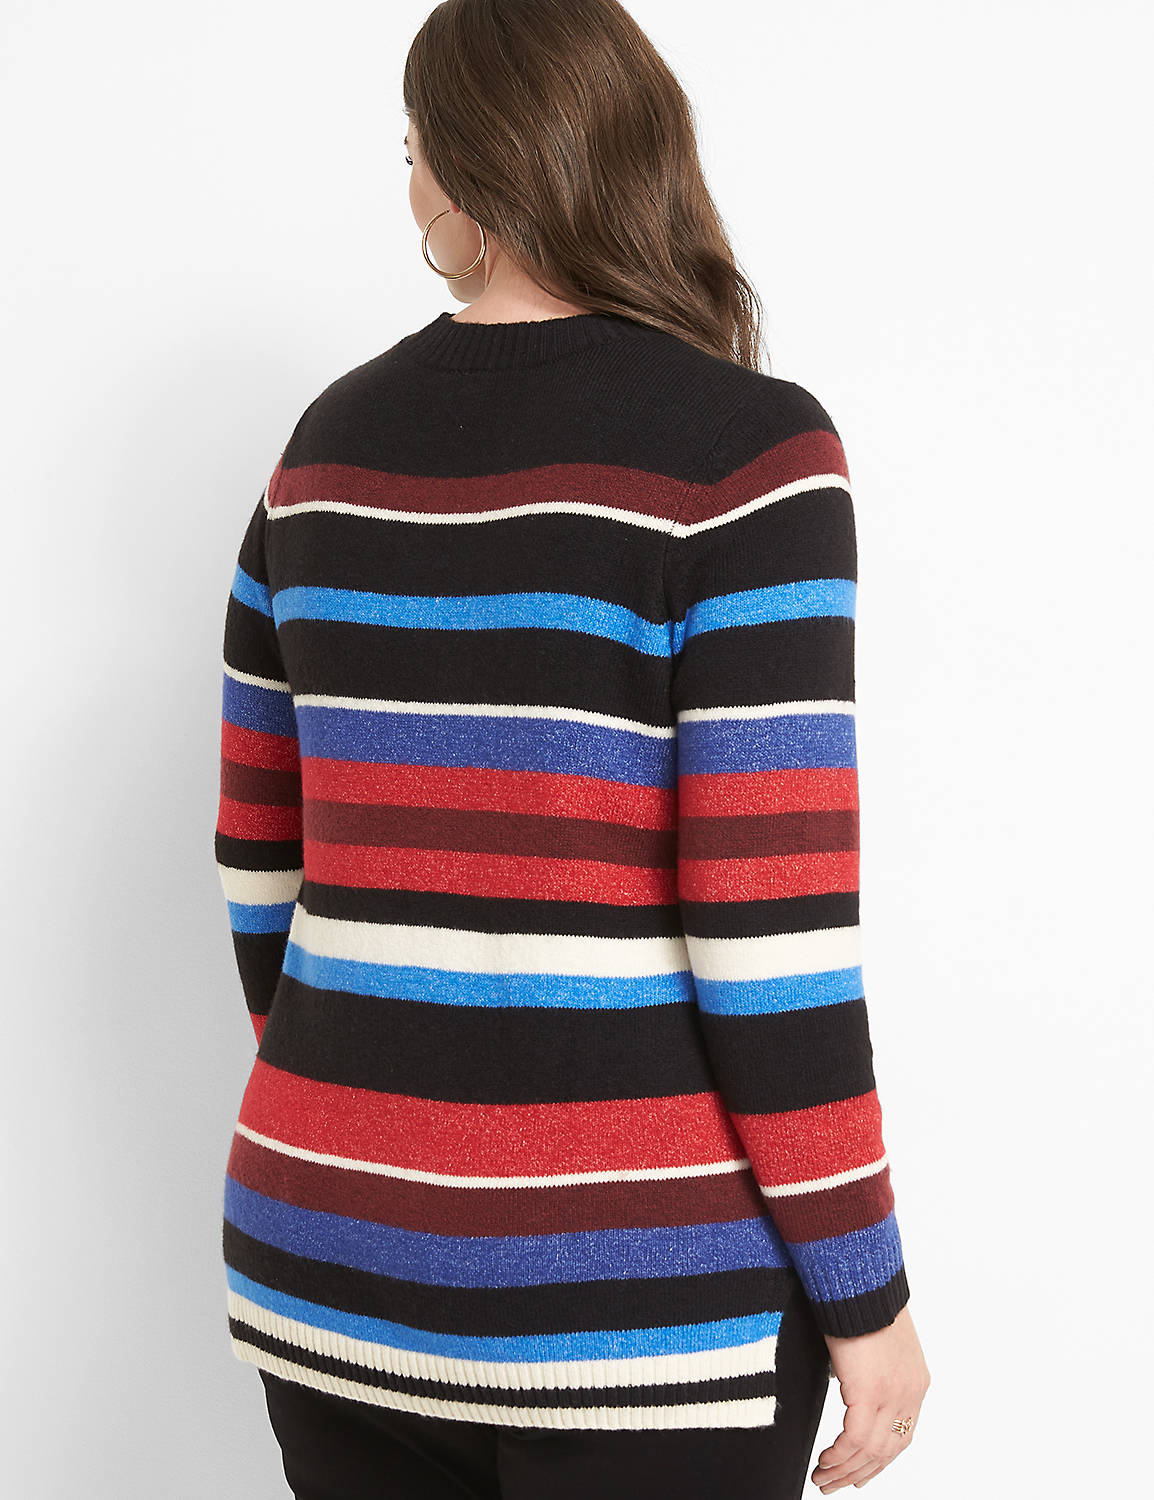 Crew-Neck Striped Sweater Product Image 2